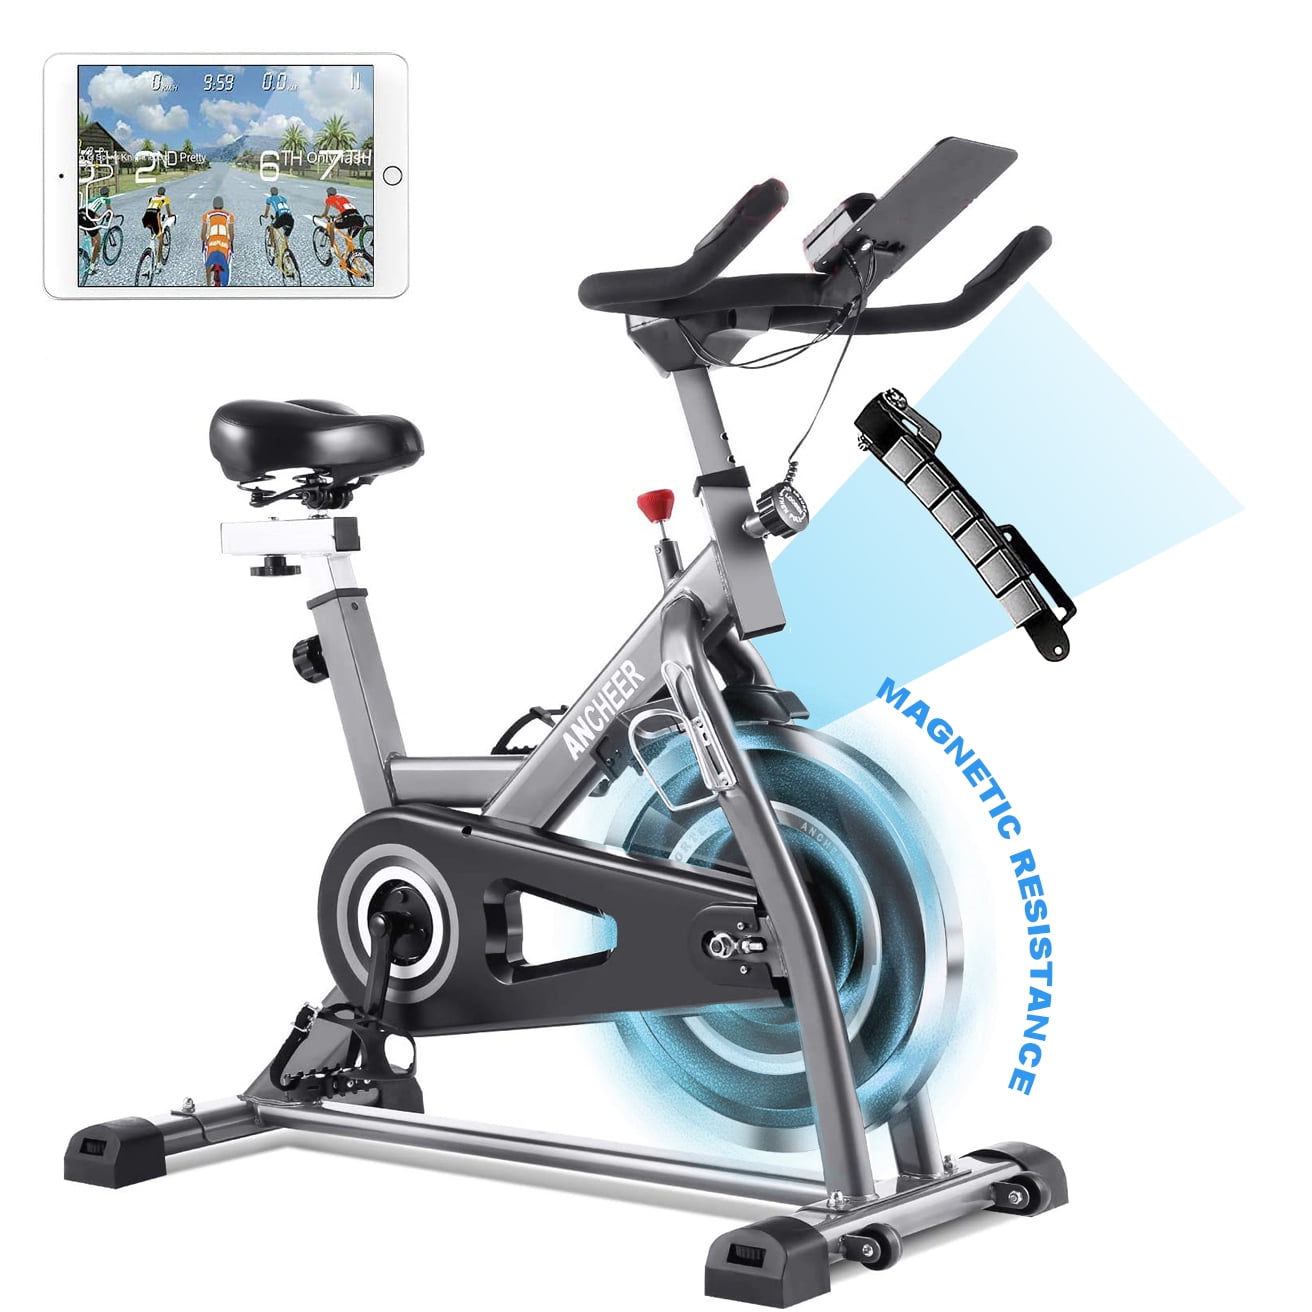 Details about   HEKA Stationary Exercise Bicycle Indoor Bike Cardio Home Gym Cycling Fitness & 